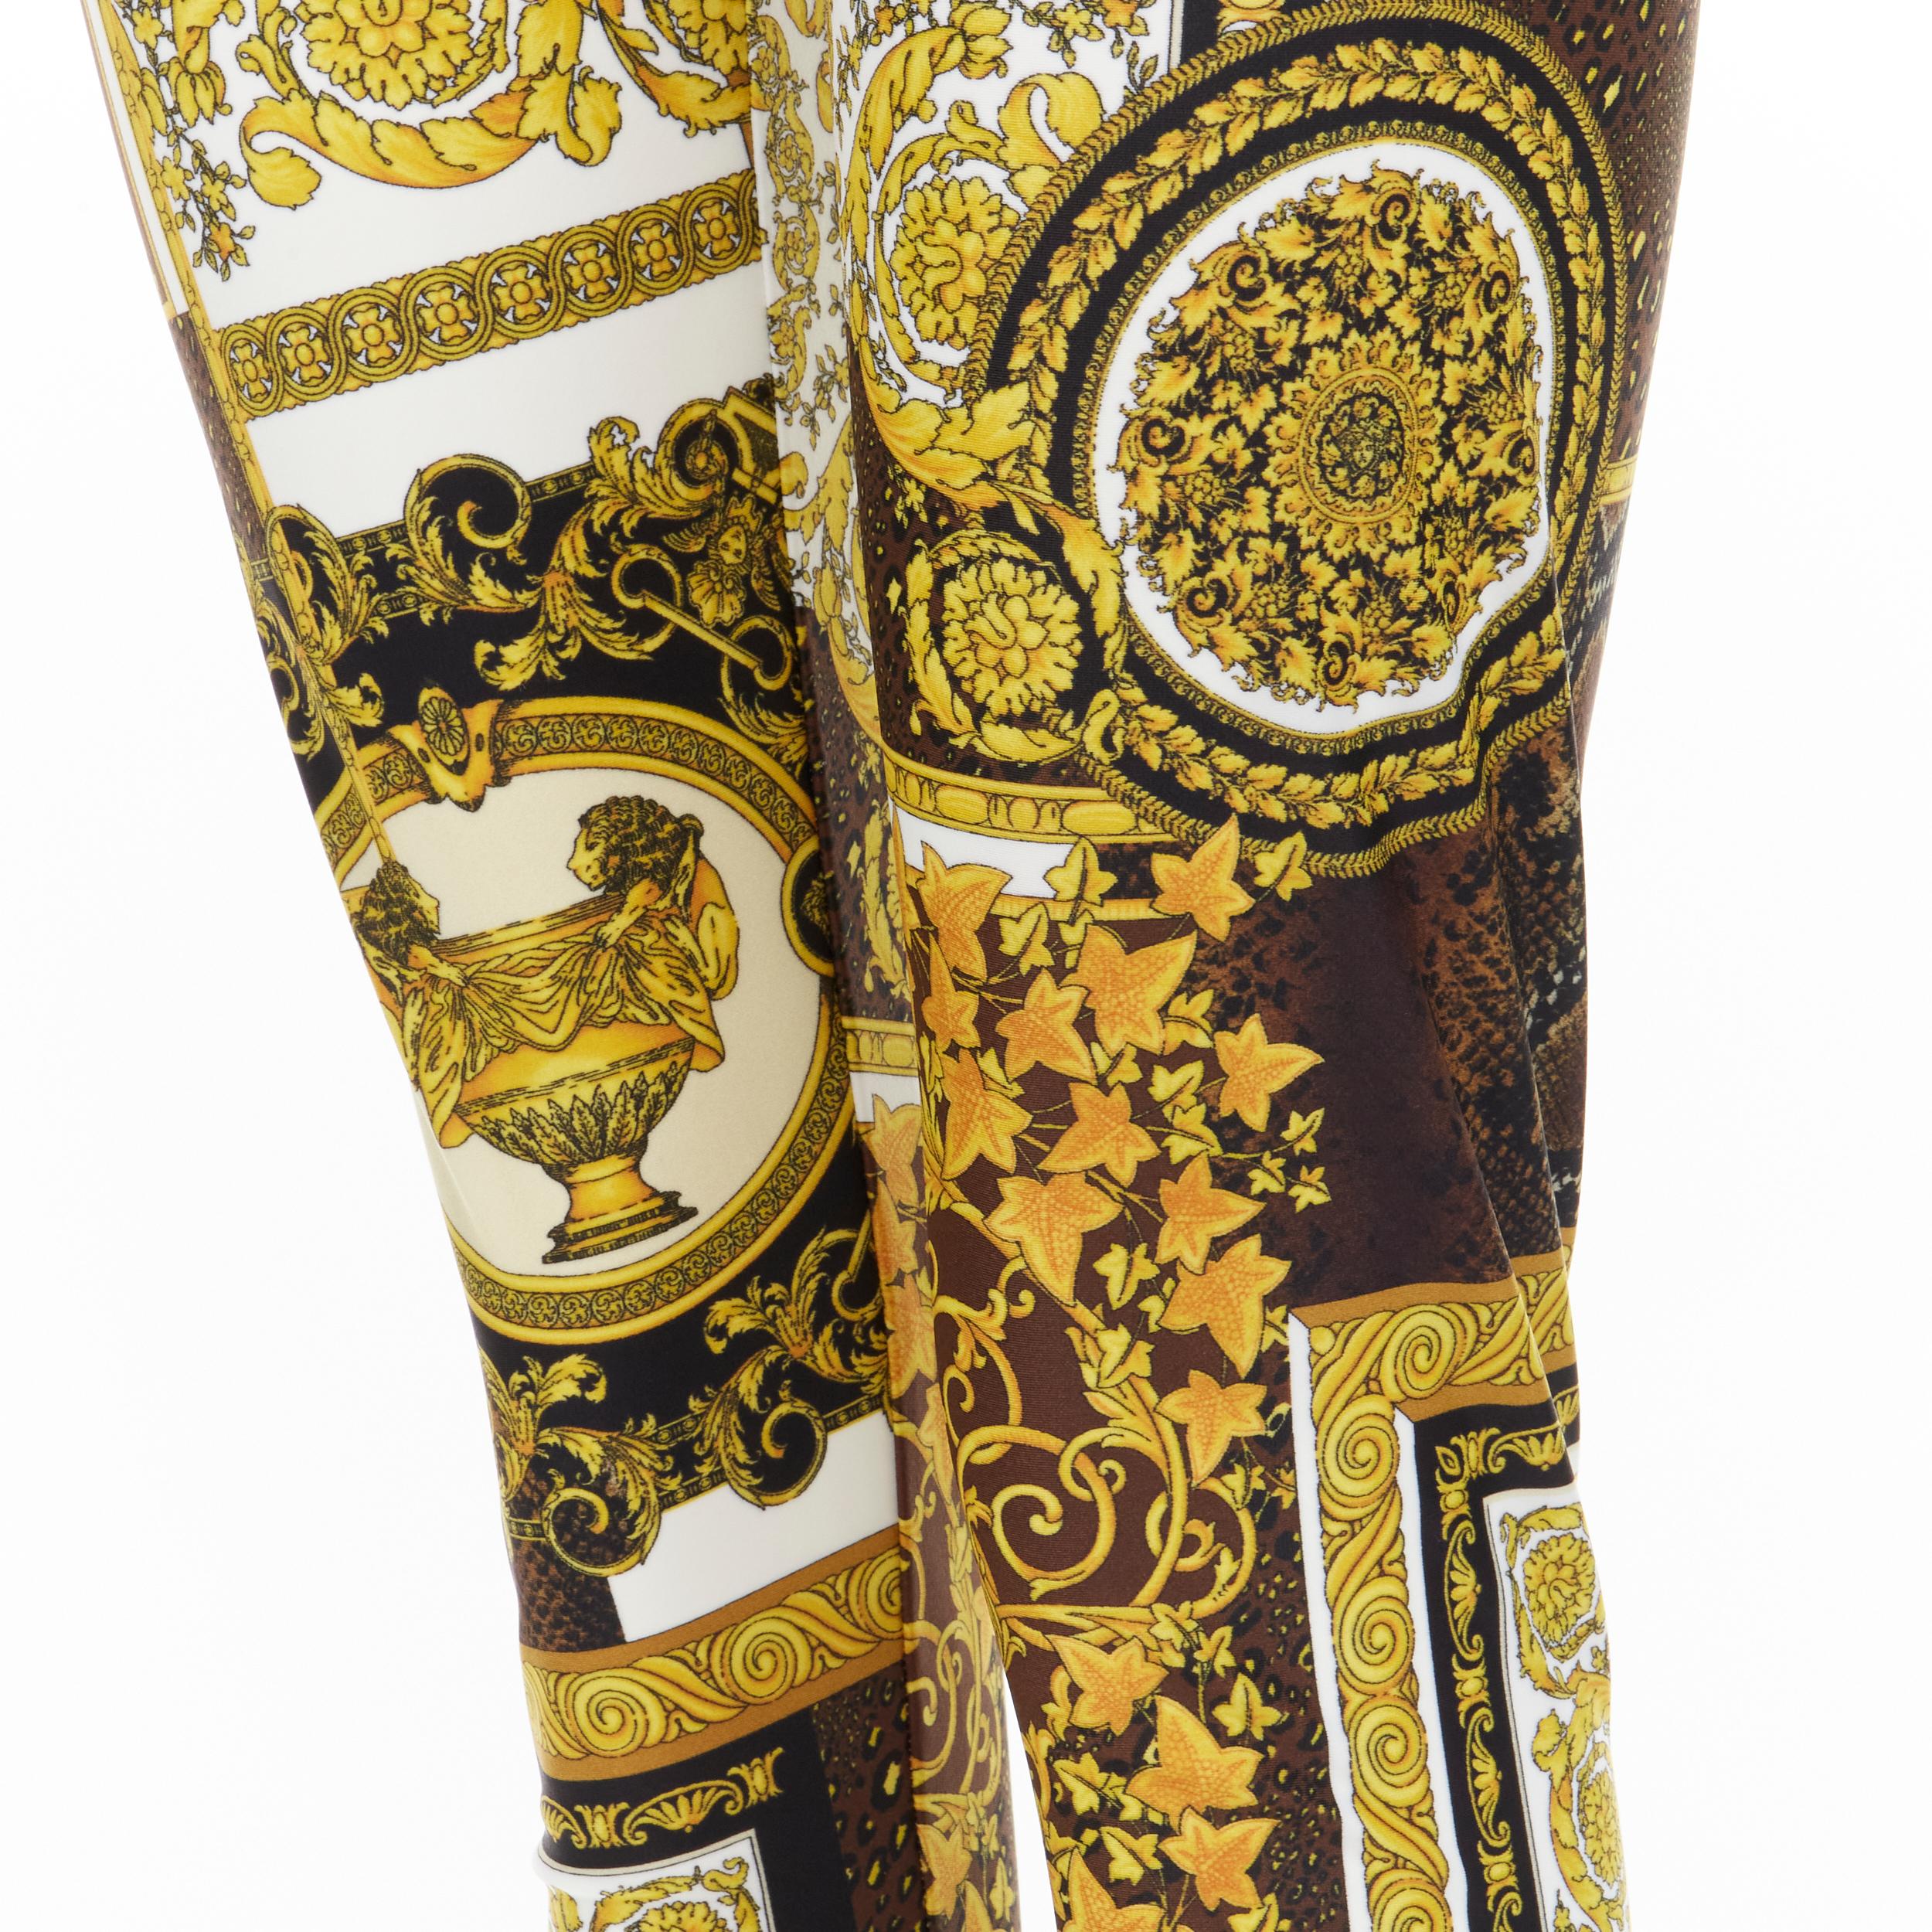 new VERSACE Mosaic Barocco black gold brown python stretchy leggings S IT40 
Reference: TGAS/C00913 
Brand: Versace 
Designer: Donatella Versace 
Collection: Mosaic Barocco 
Material: Polyamide- 
Color: Gold 
Pattern: Floral 
Closure: Stretch 
Extra